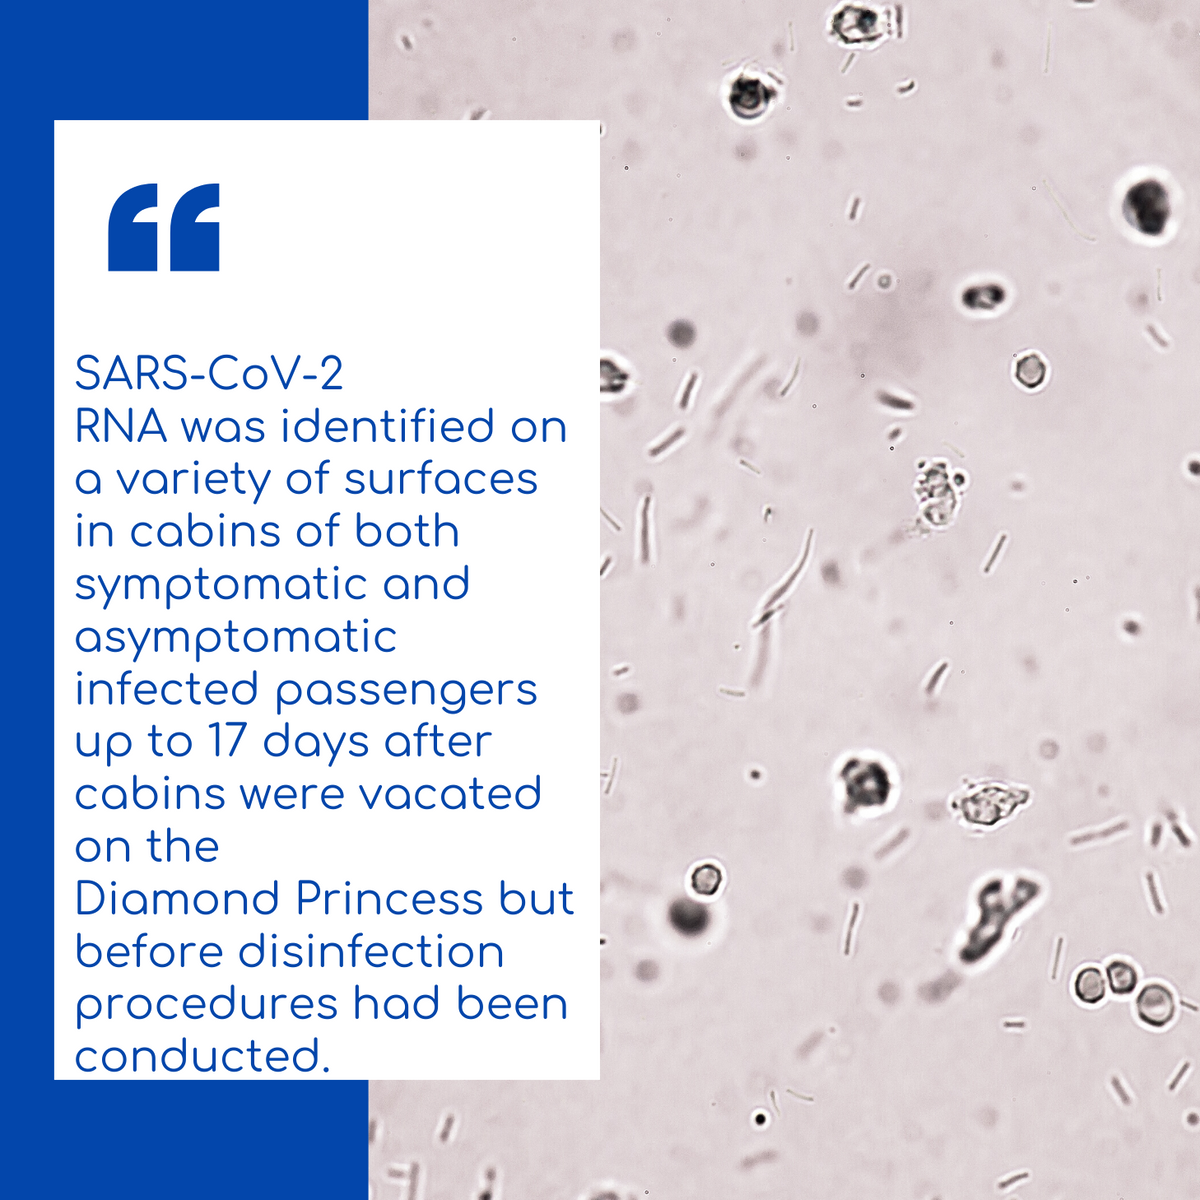 SARS-CoV-2 RNA was identified on a variety of surfaces in cabins of both symptomatic and asymptomatic infected passengers up to 17 days after cabins were vacated on the Diamond Princess but before disinfection procedures had been conducted.